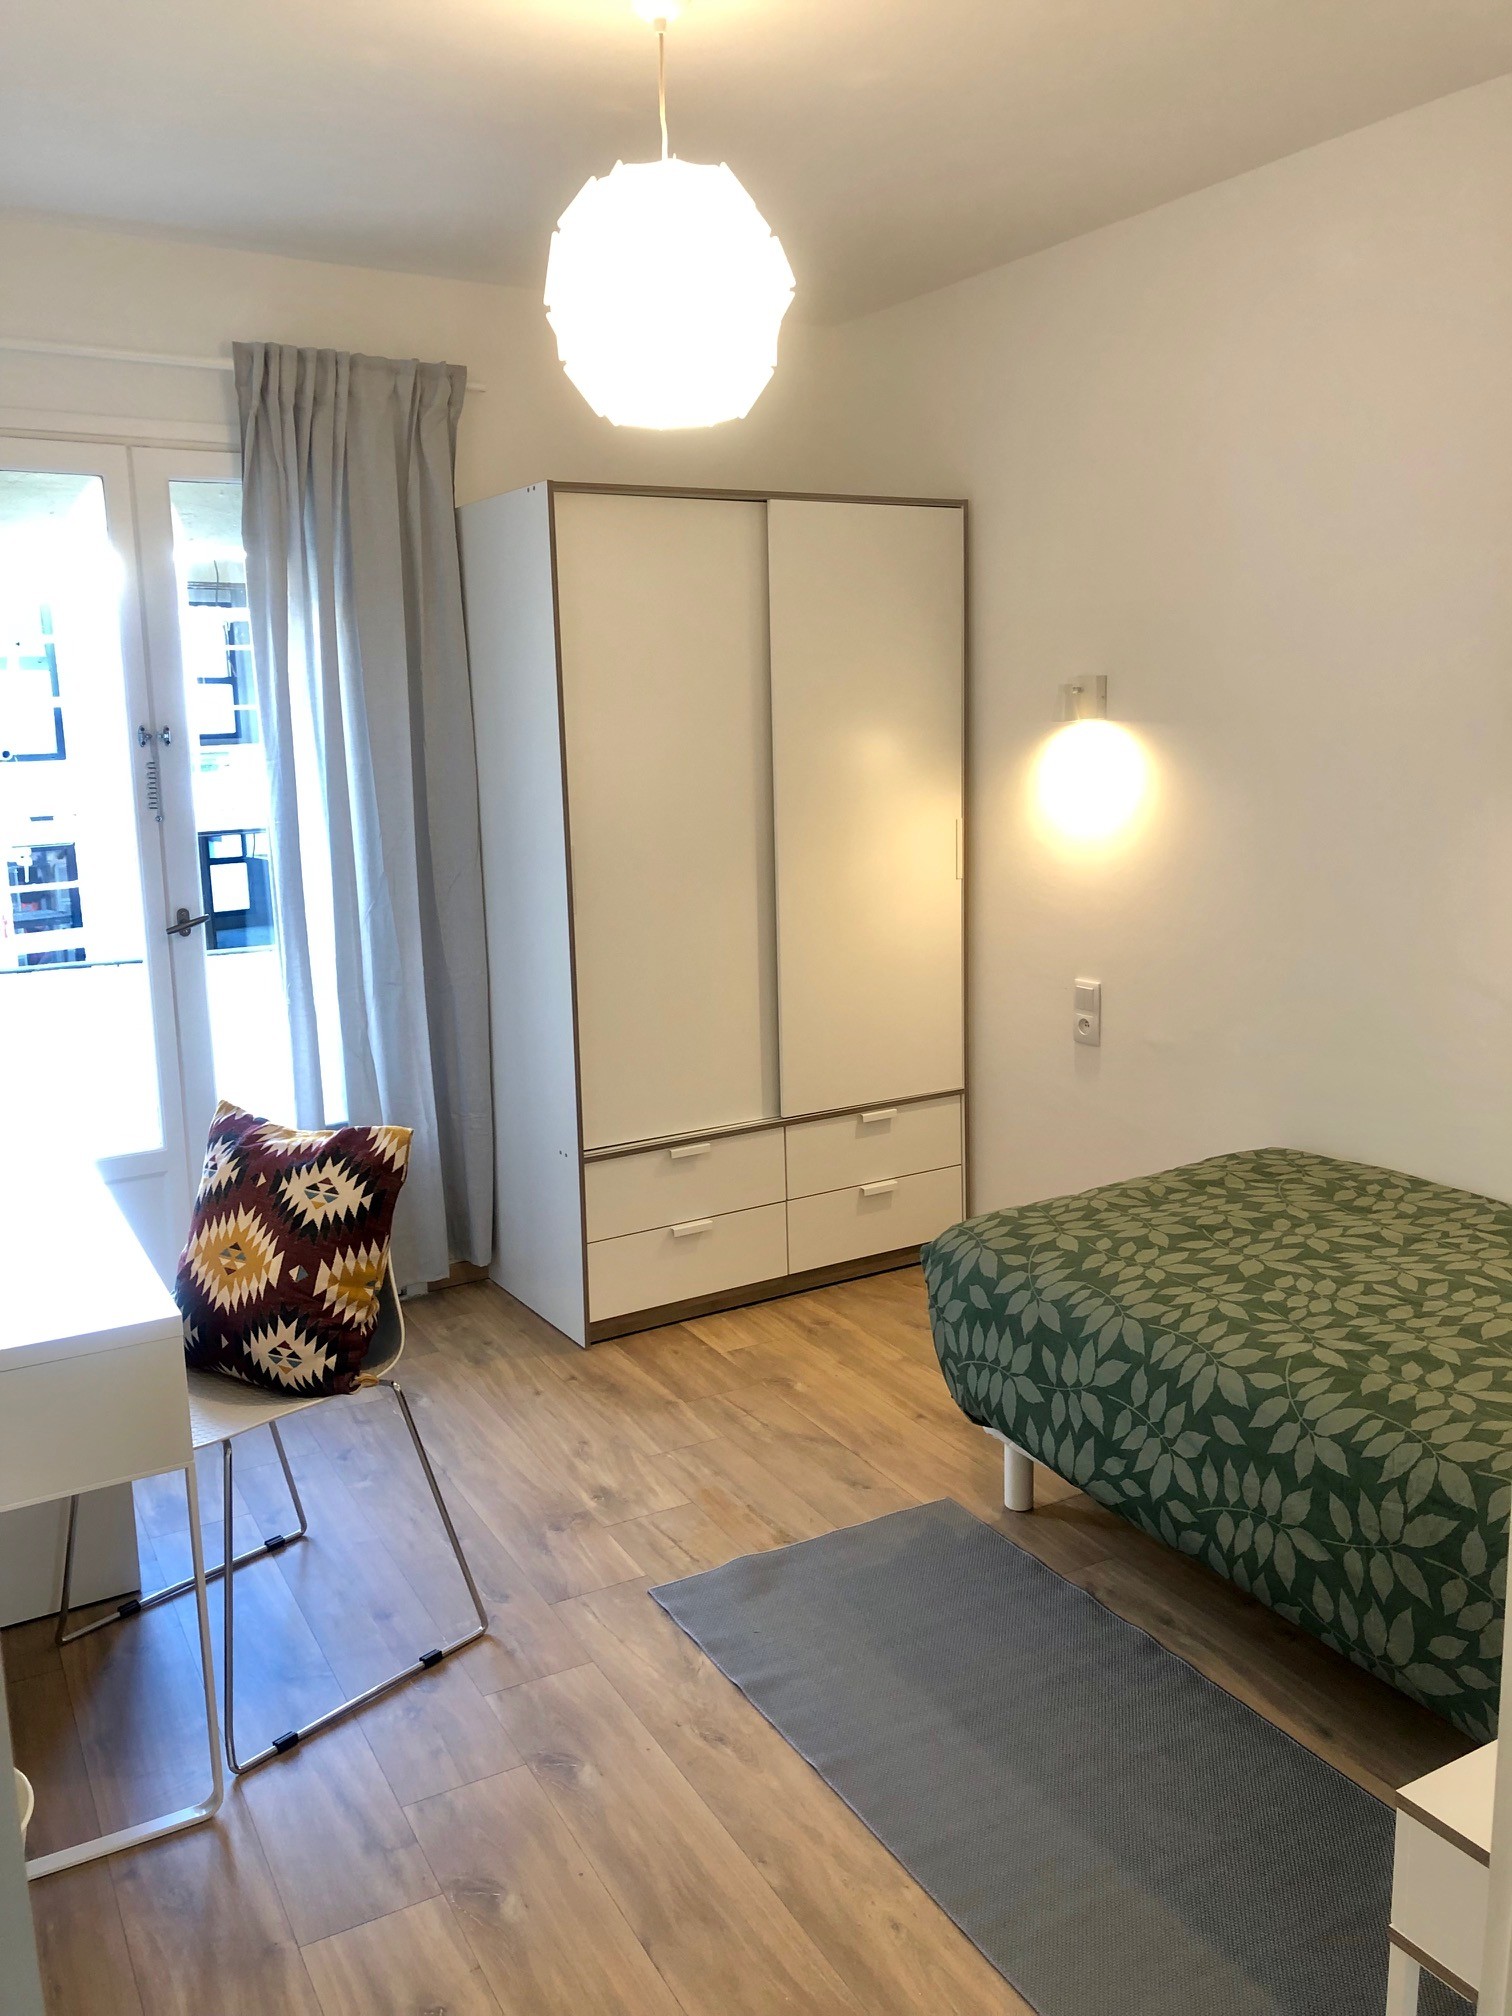 Share flat 4 private rooms - apartment refurbished - downtown Center ...